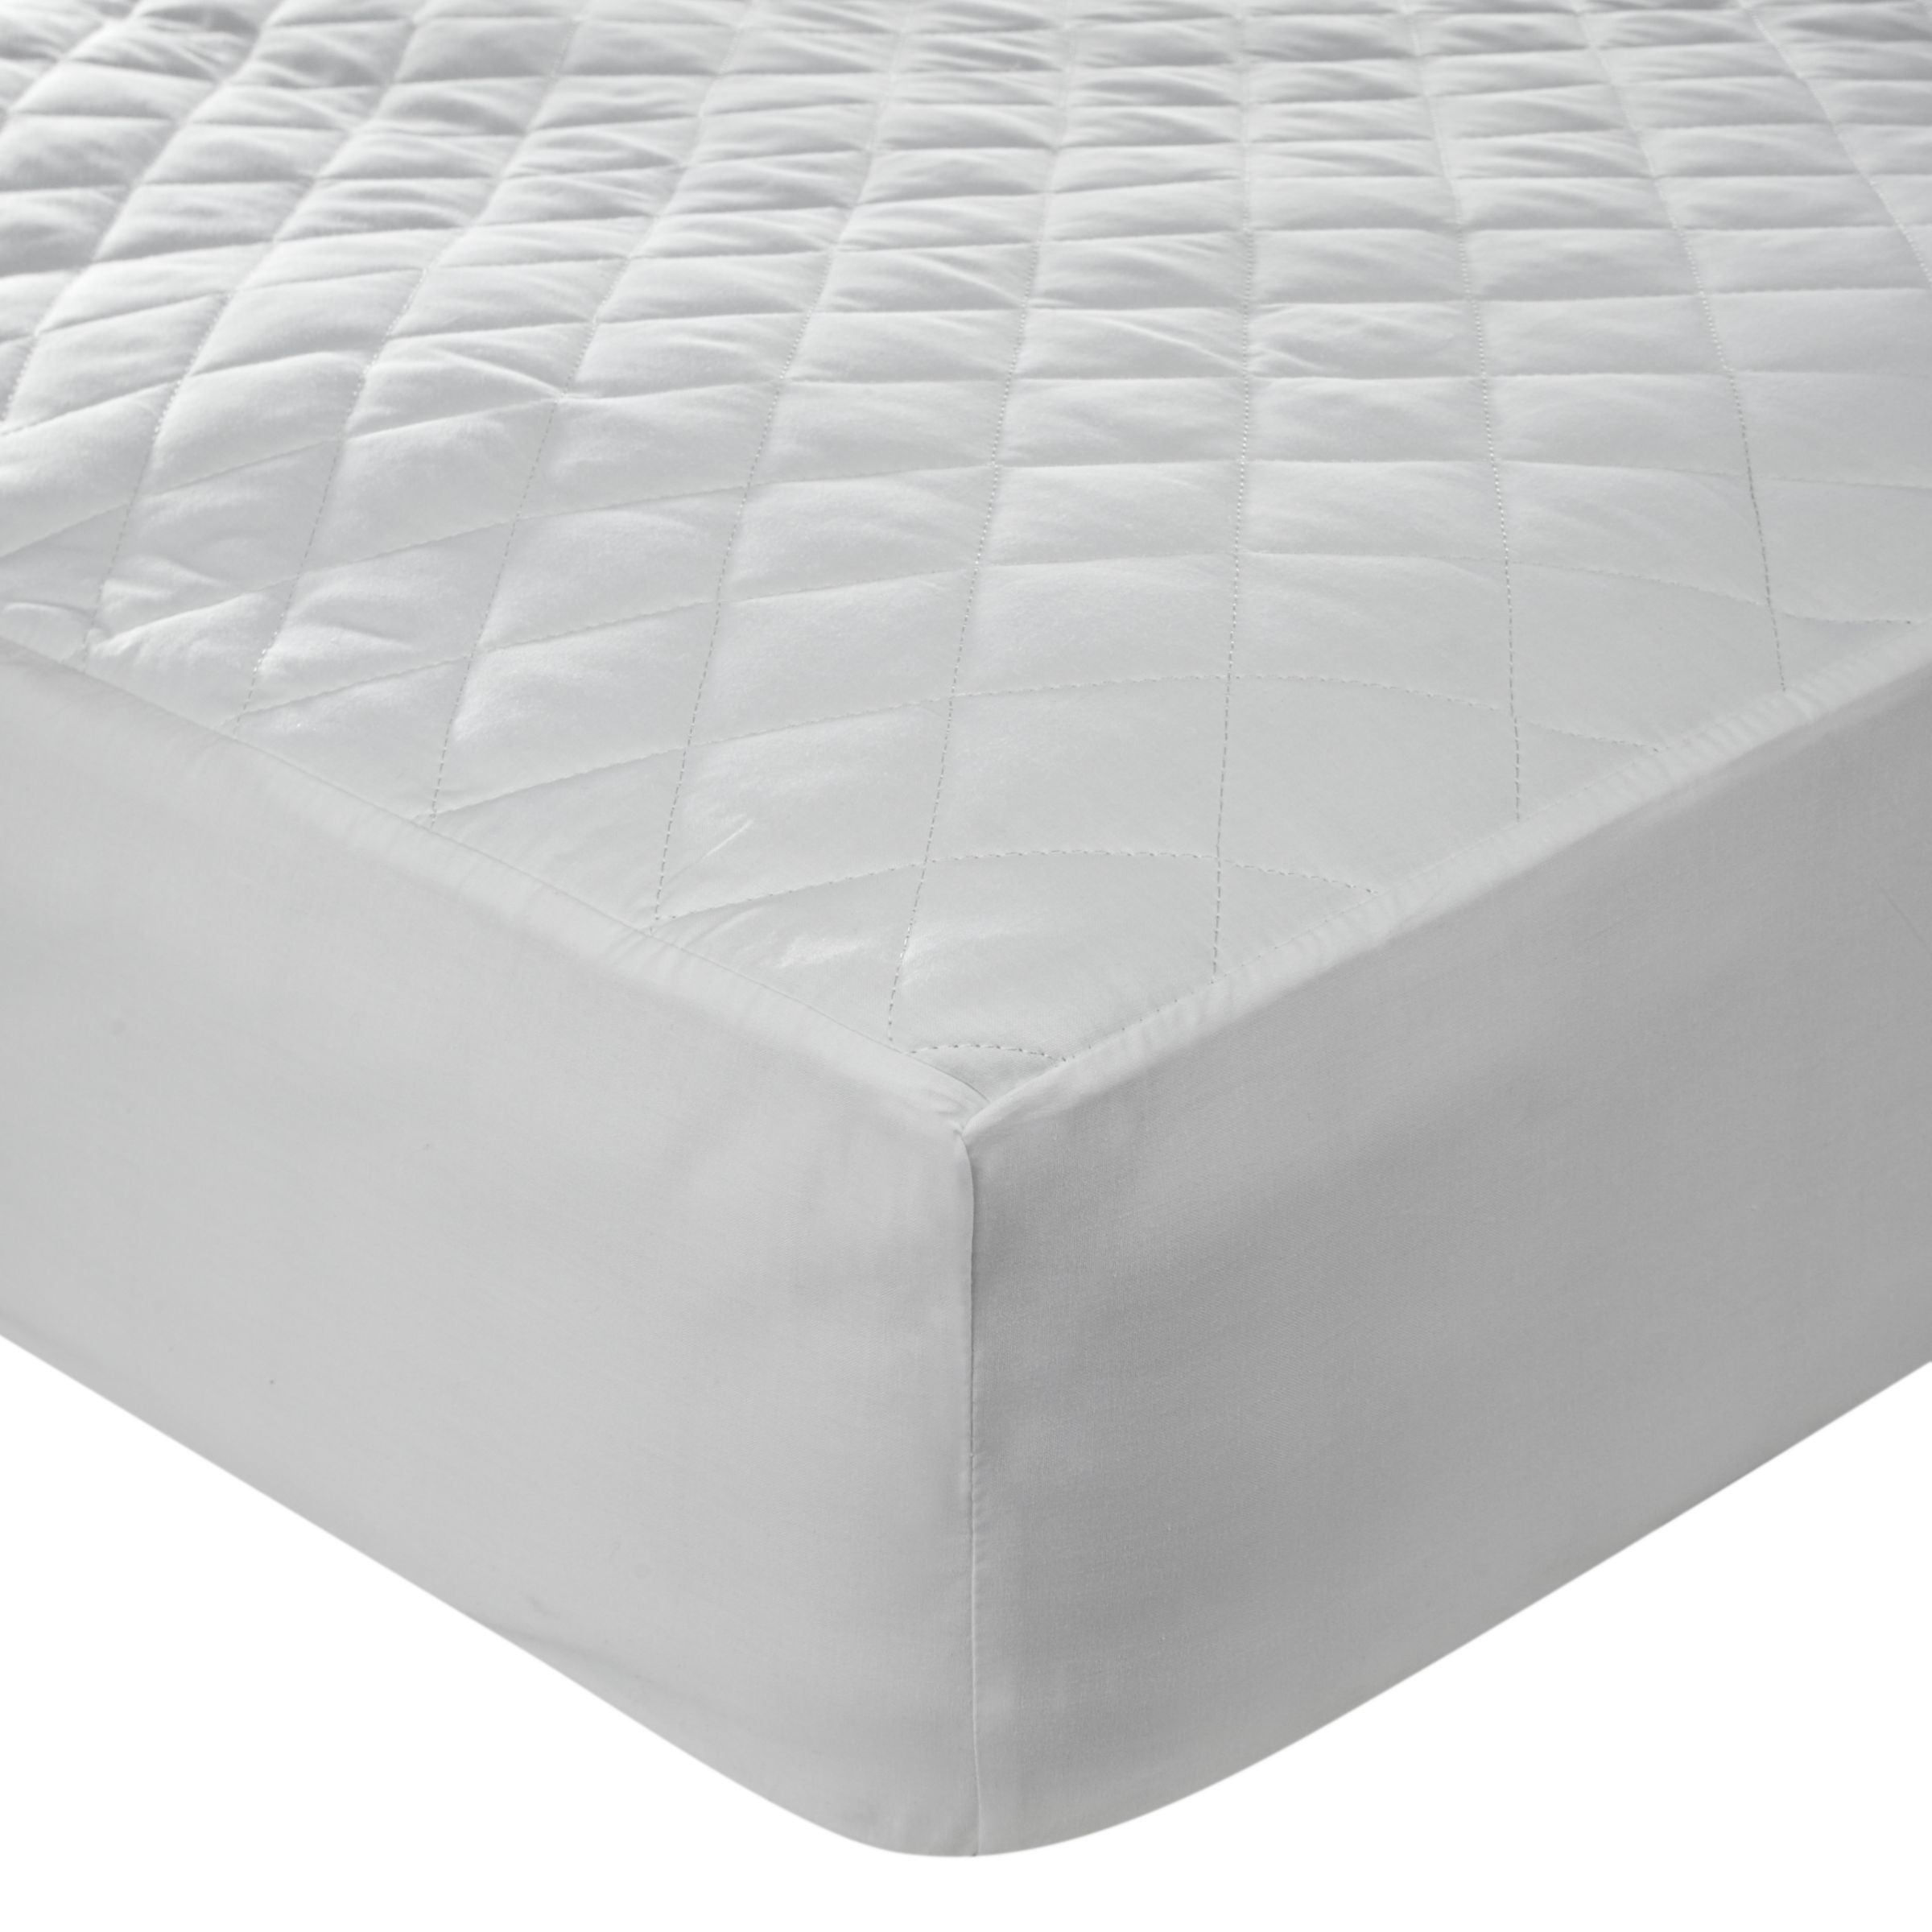 John Lewis Polycotton Quilted Mattress Protector, Kingsize